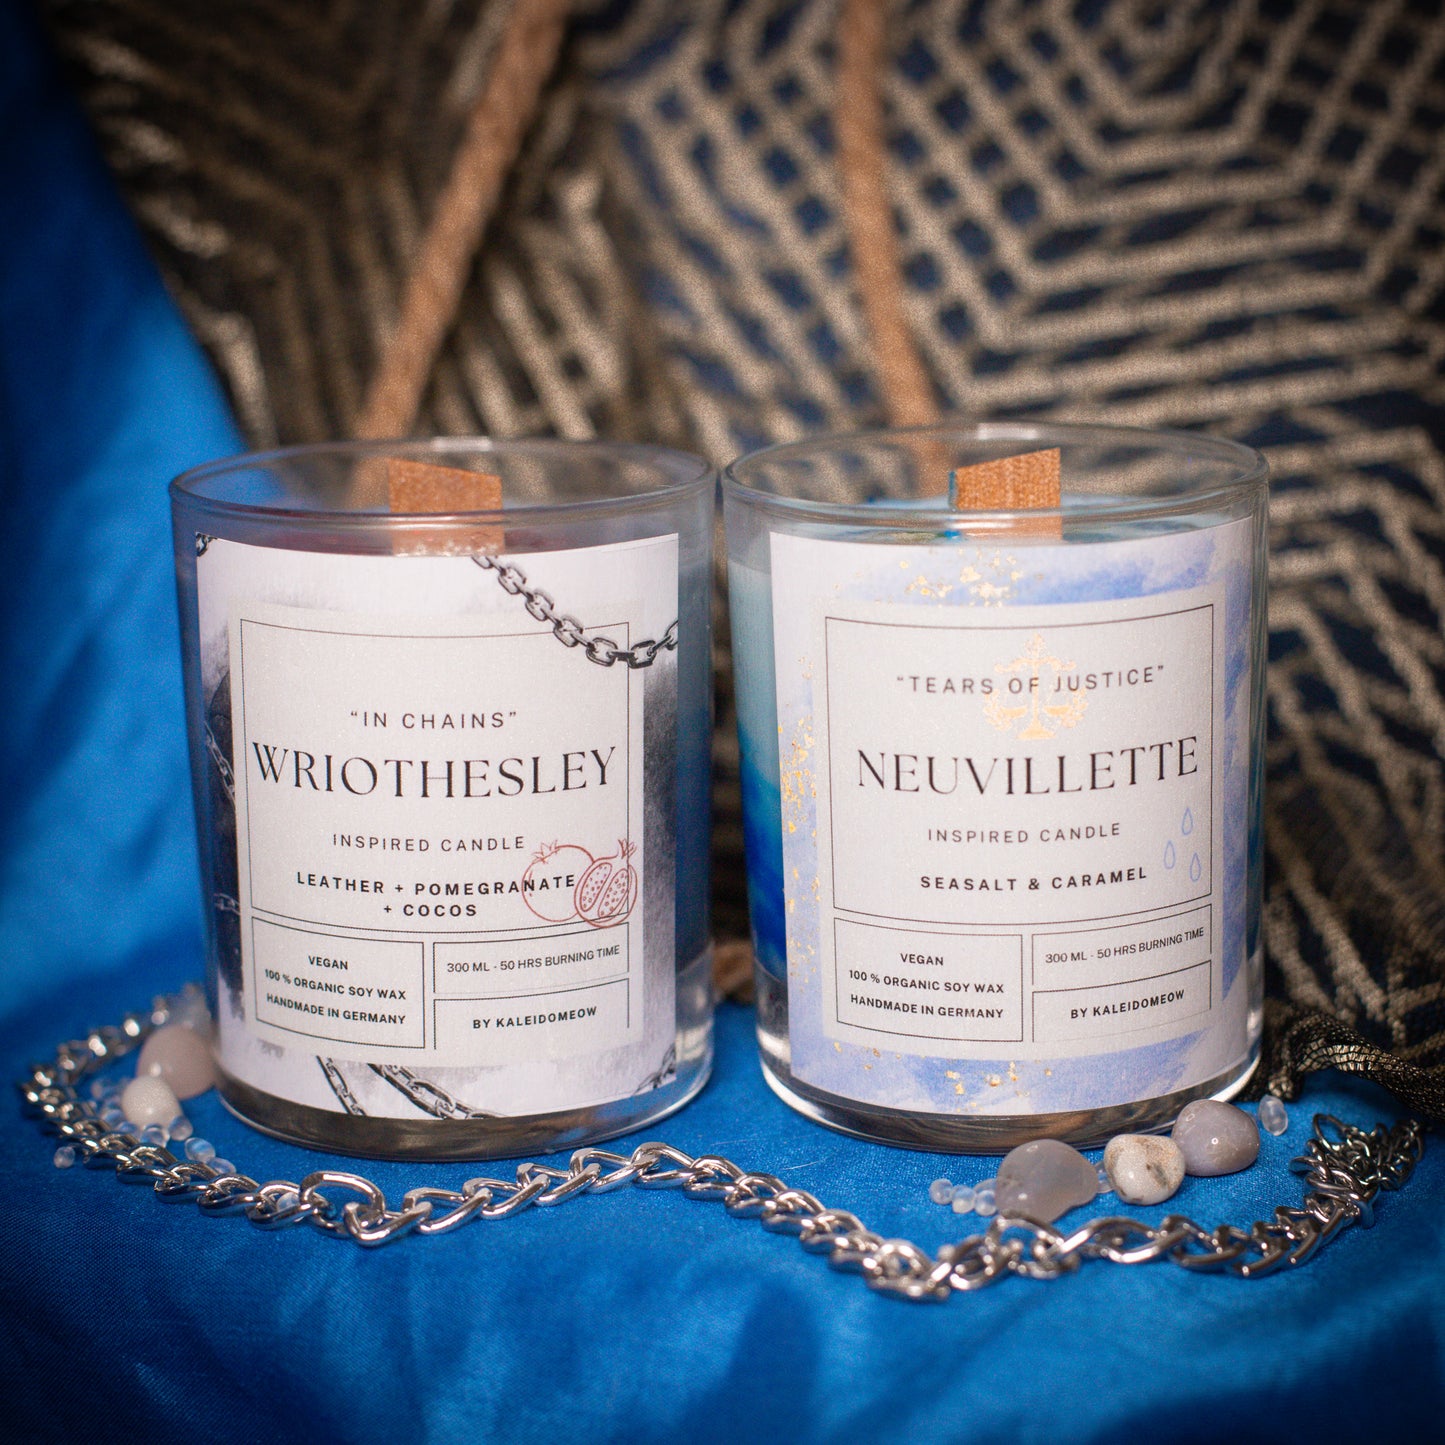 Neuvillette inspired candle - 'Tears of Justice' Genshin inspired scented candle 300 ML